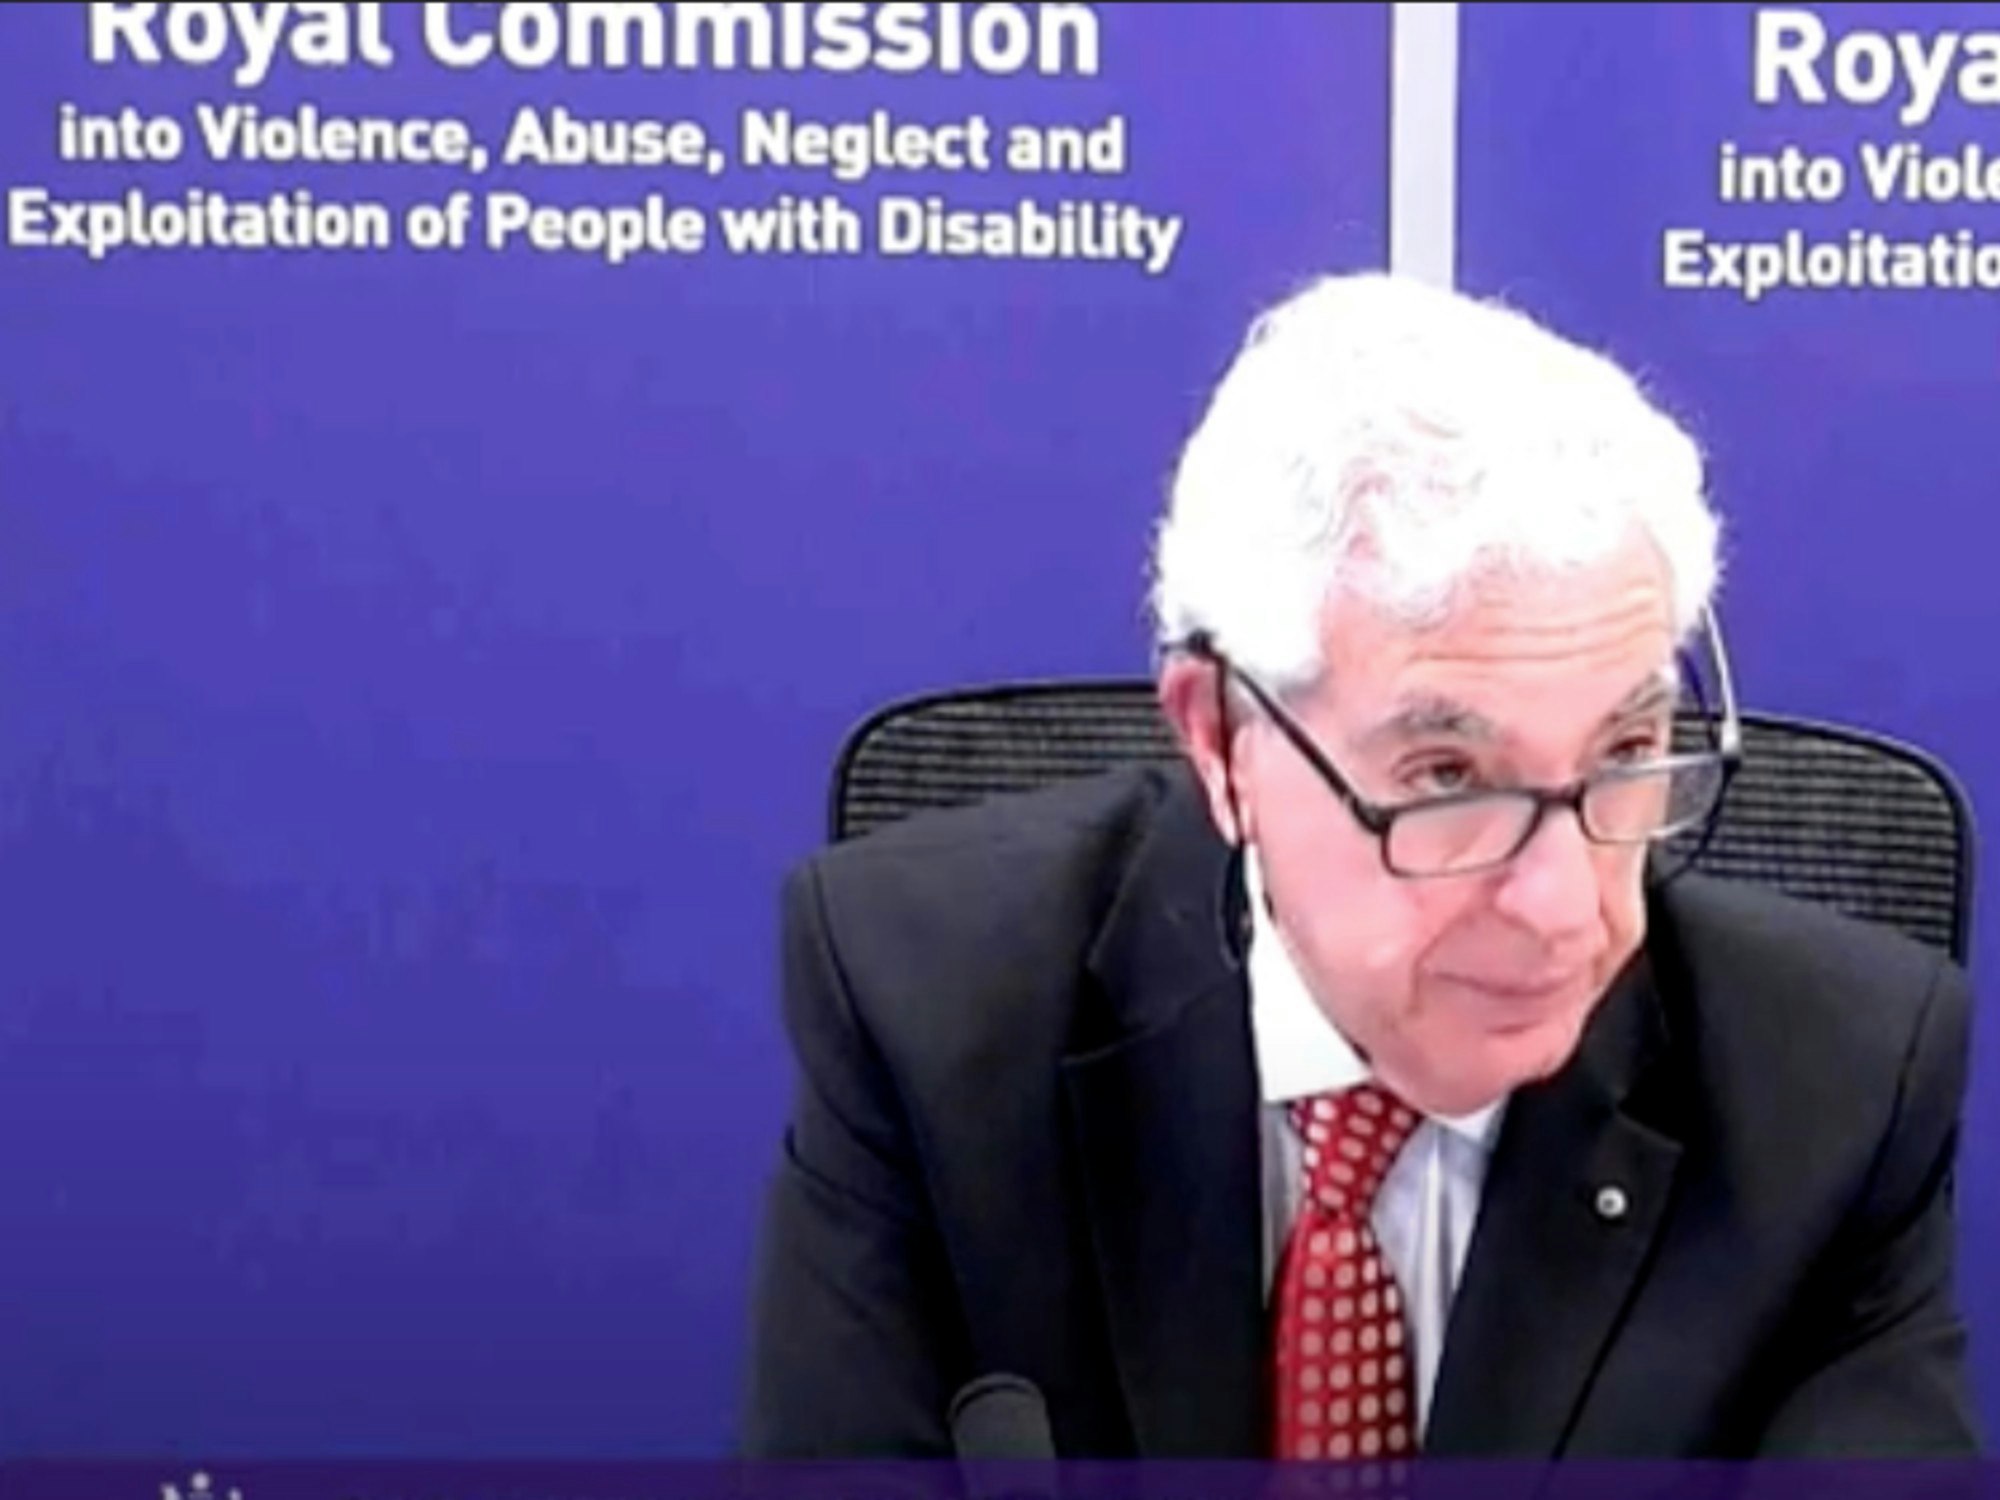 <p>Chair of the Disability Royal Commission the Honourable Ronald Sackville AO QC says changes to confidentiality to protect people with disability are timely. [Source: Disability Royal Commission]</p>
